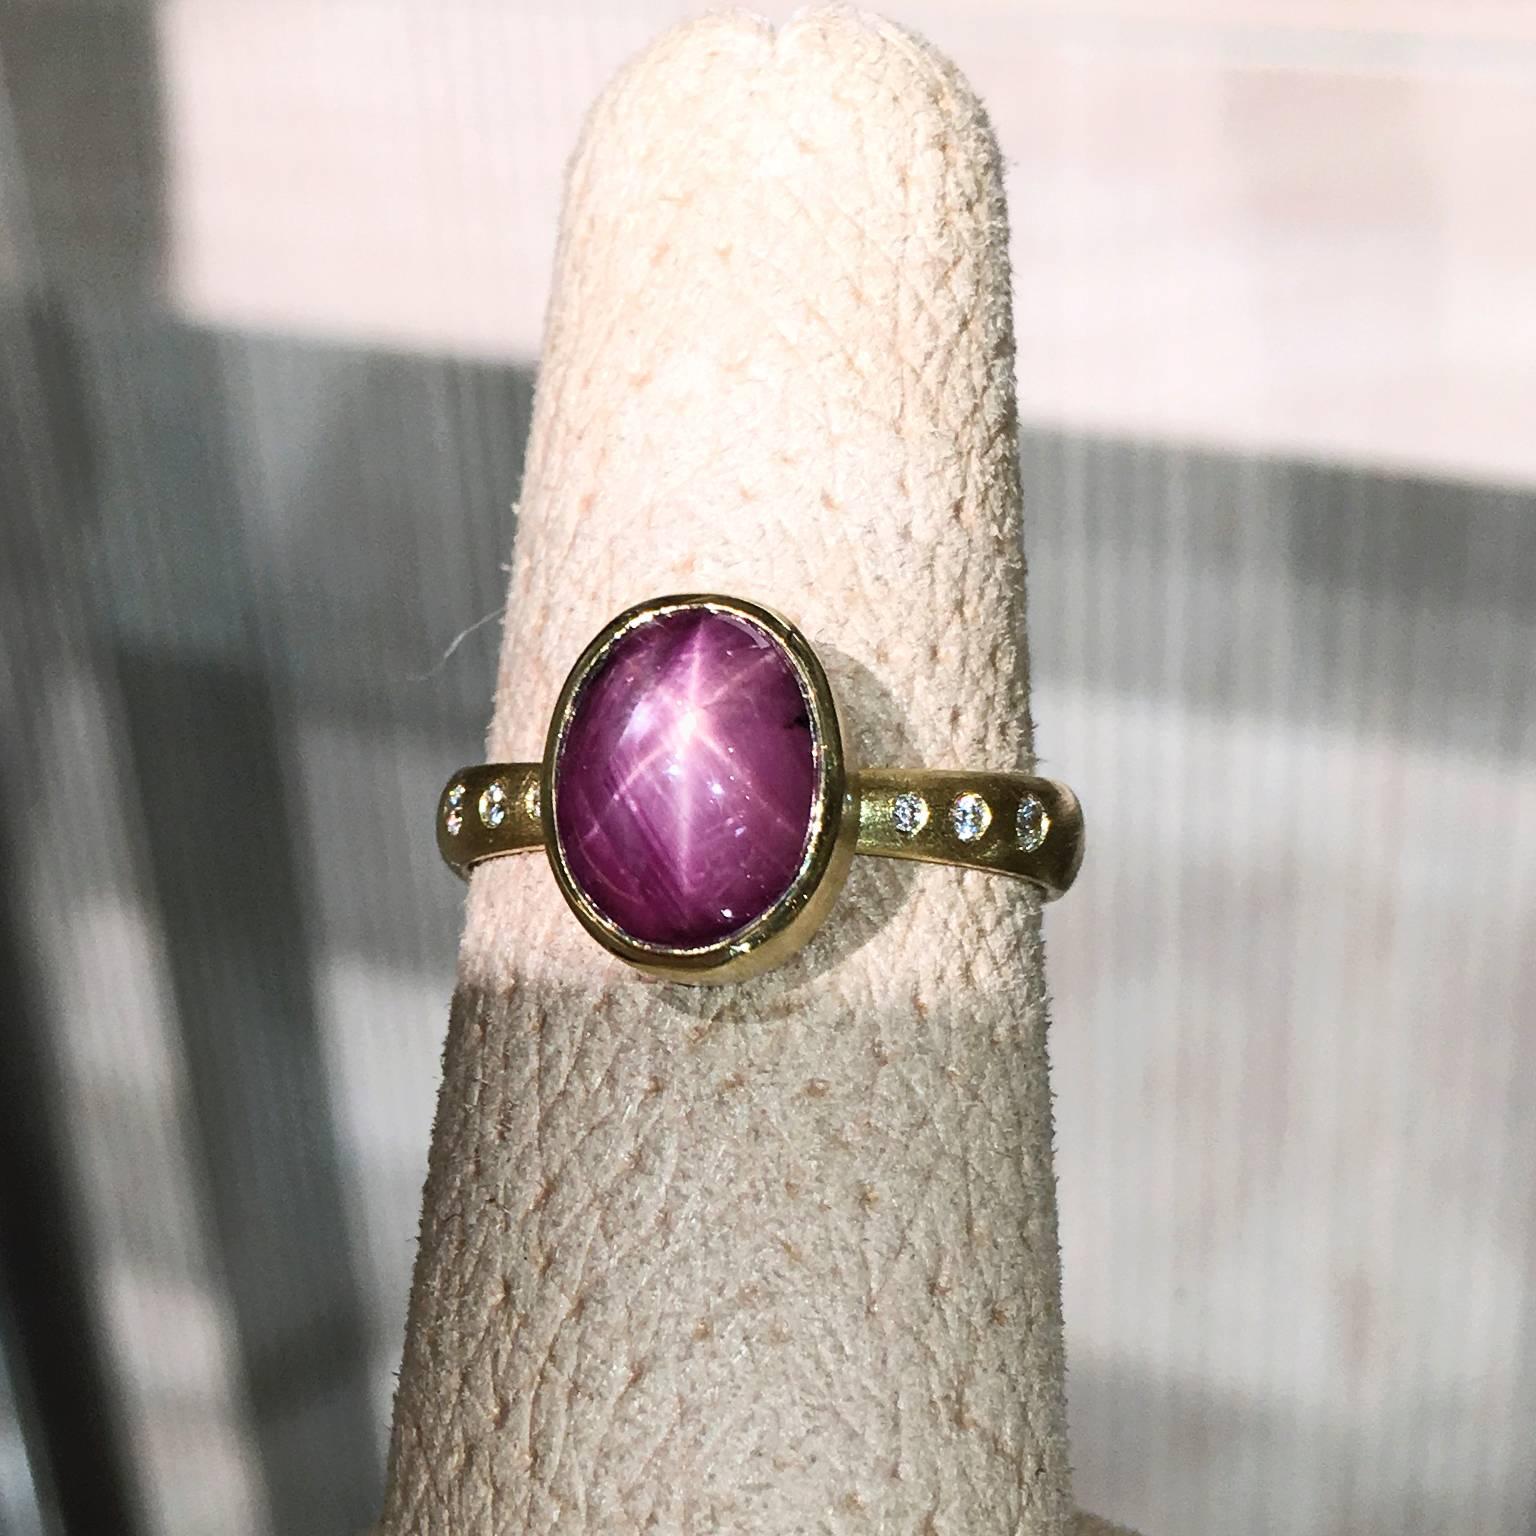 One-of-a-Kind Star Dome Ring handcrafted in matte-finished 18k yellow gold by Robin Waynee with an oval cabochon-cut 5.35 carat purplish-red six-ray star ruby bezel-set and accented with six round brilliant-cut E-F/vs1 white diamonds totaling 0.07